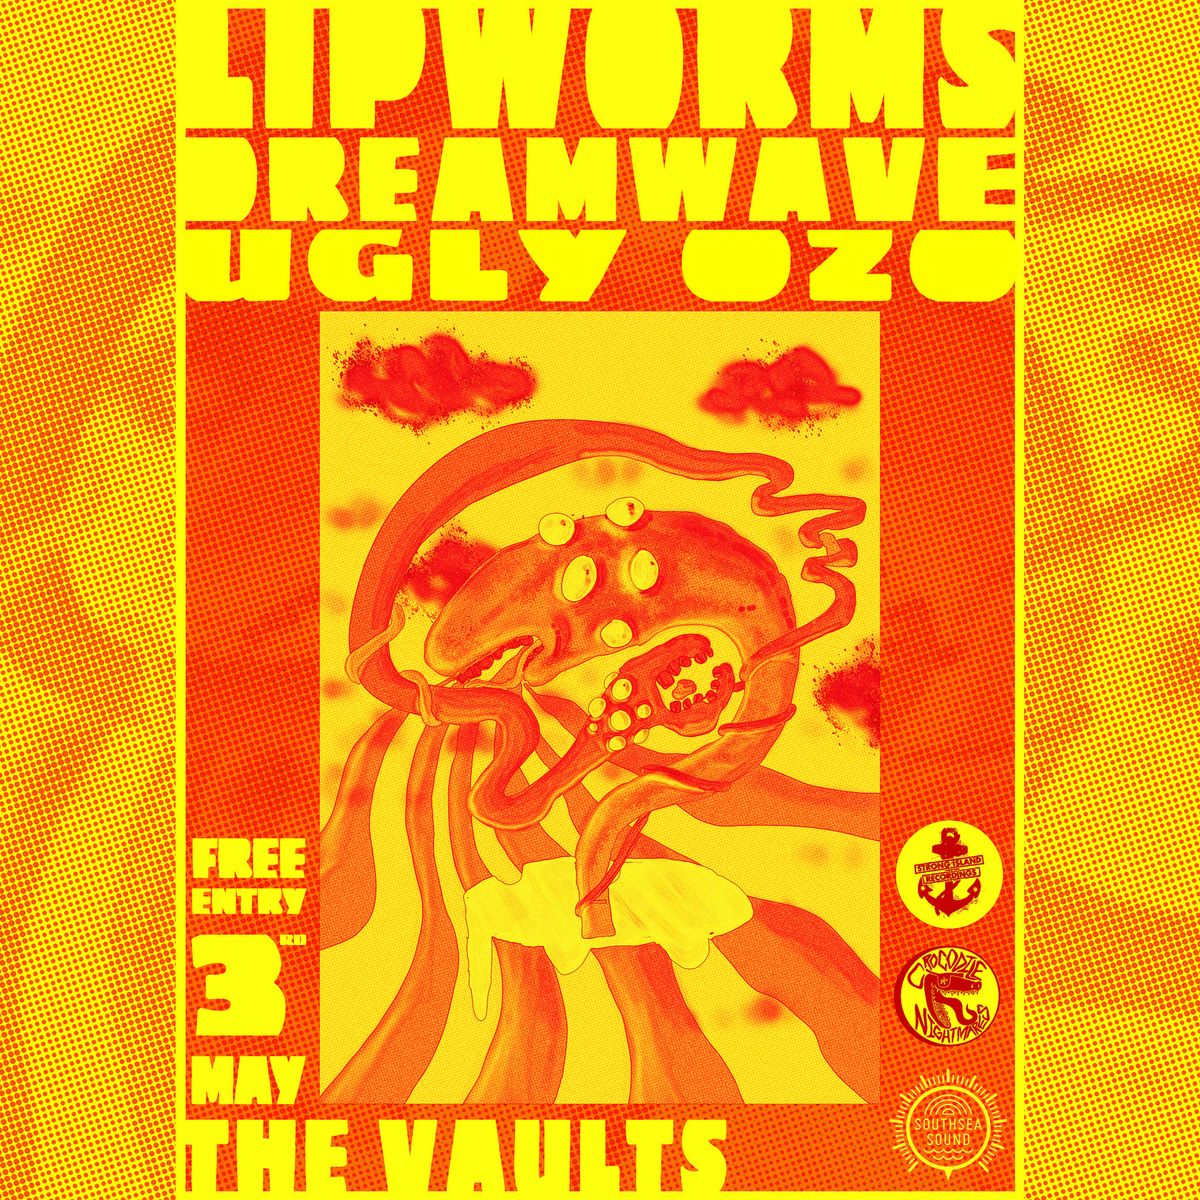 SIR & CN Presents: LIPWORMS + DREAMWAVE + ugly ozo (Free entry)